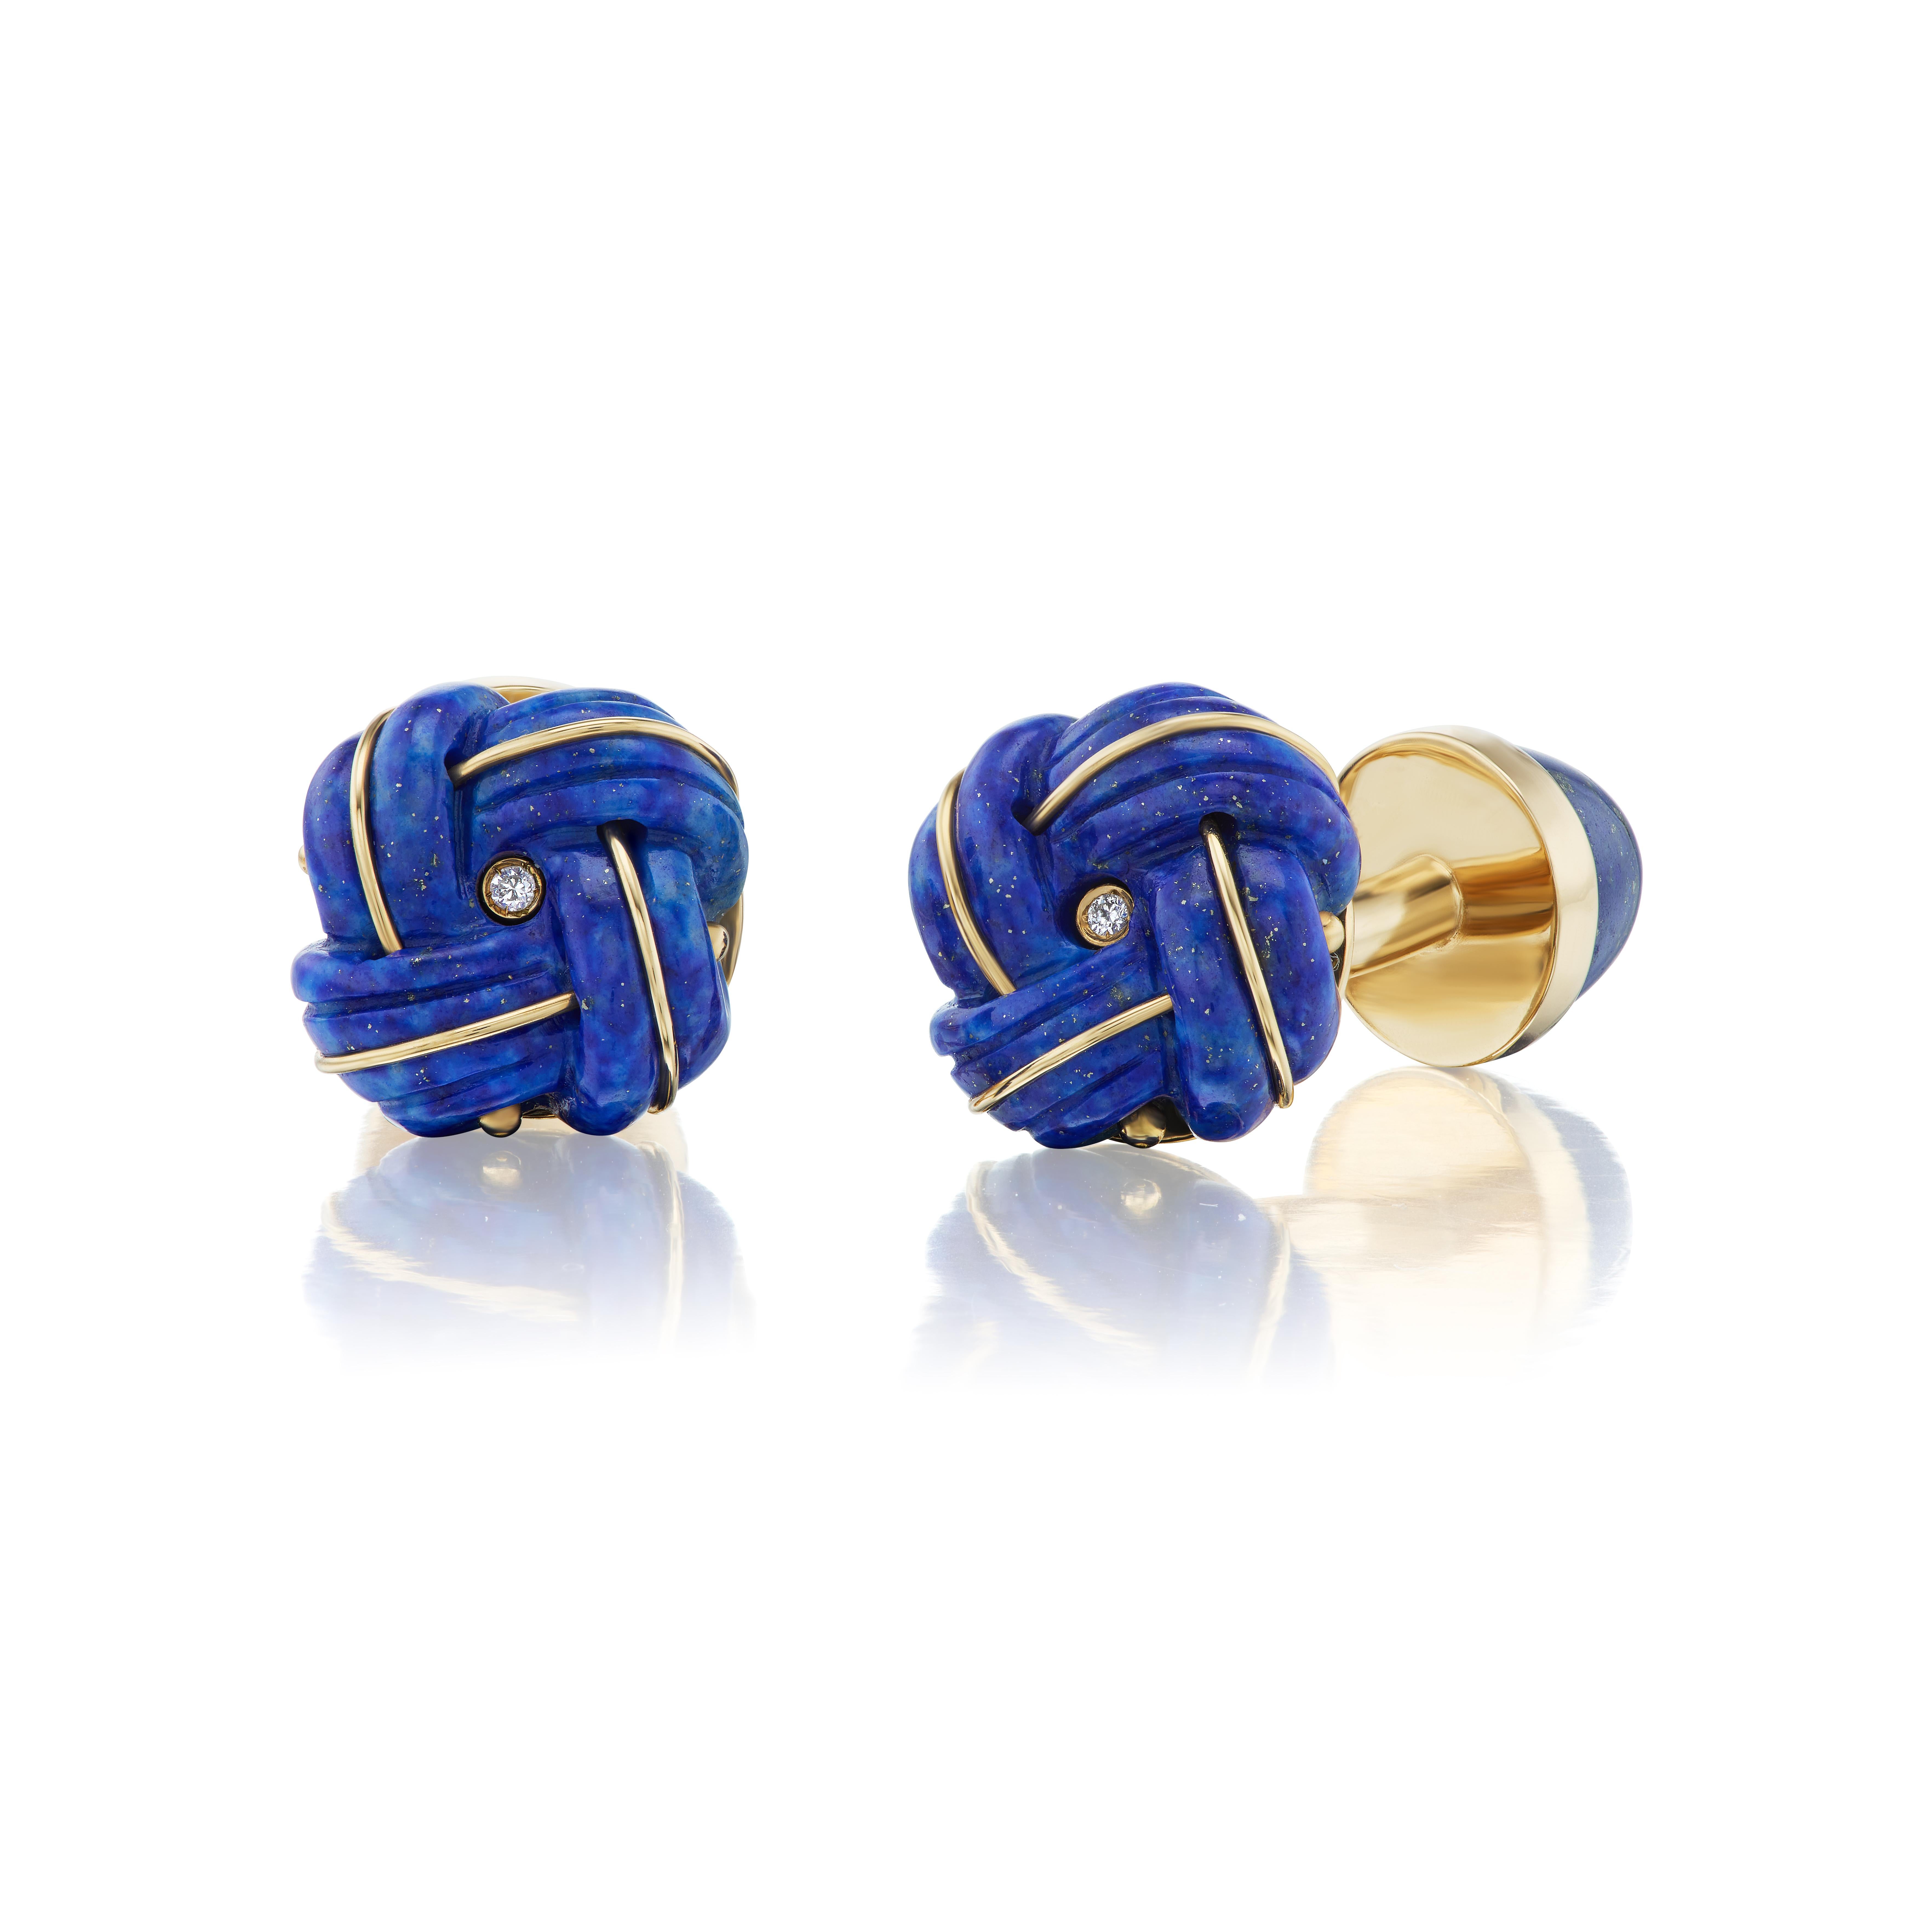 The classic knot cufflink, reinterpreted in carved lapis-lazuli and discretely embellished with gold and diamonds.  

Knot cufflinks date back to the early 20th century and the originals were made of silk by the French shirt maker Charvet.  Since